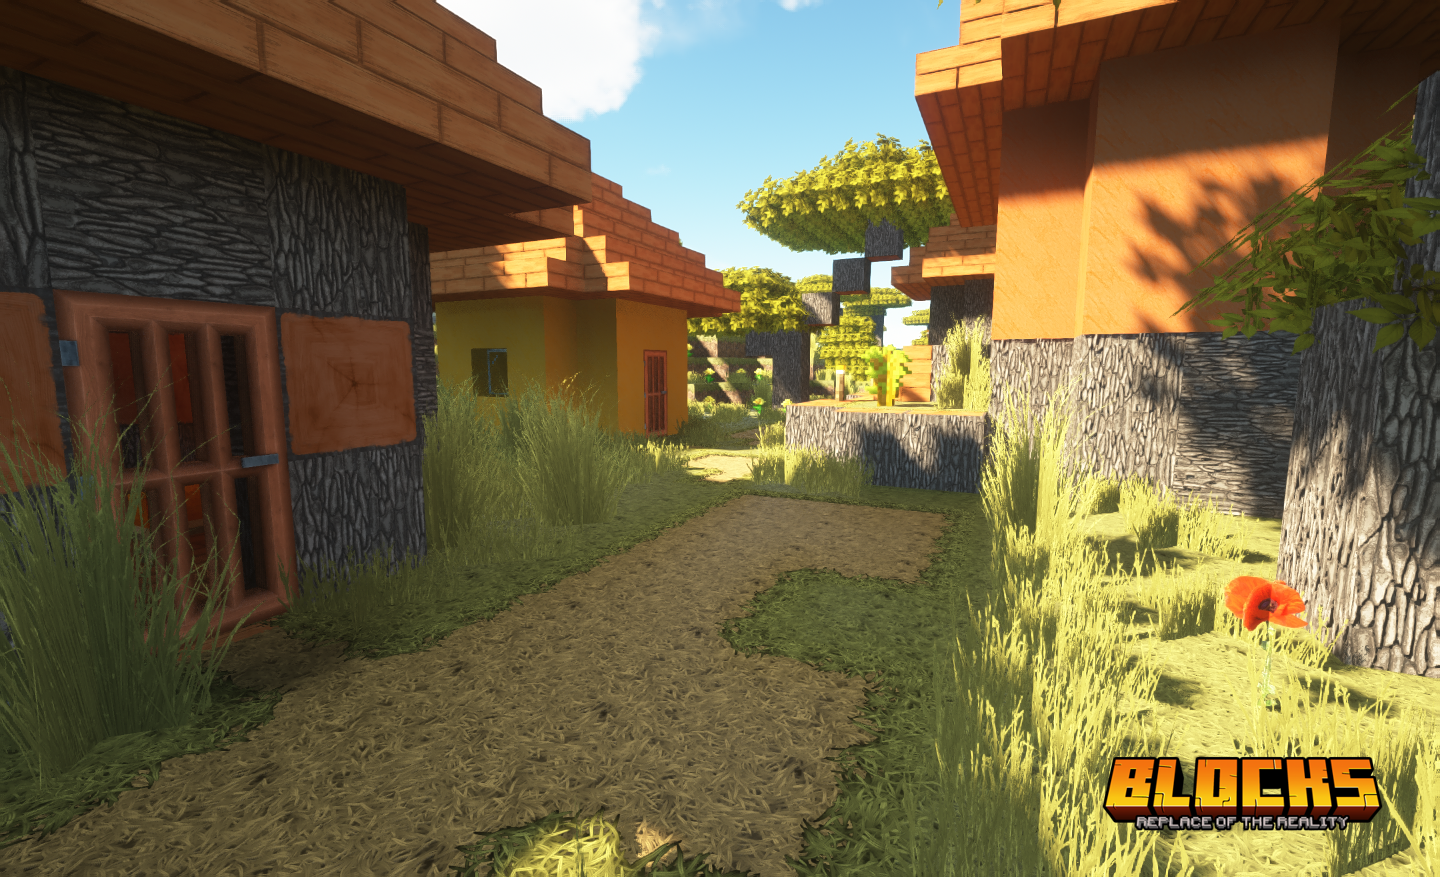 Tolkning positur sten Minecraft rotrBLOCKS 256x PBR\POM | Replace of the Reality mod 2022 download